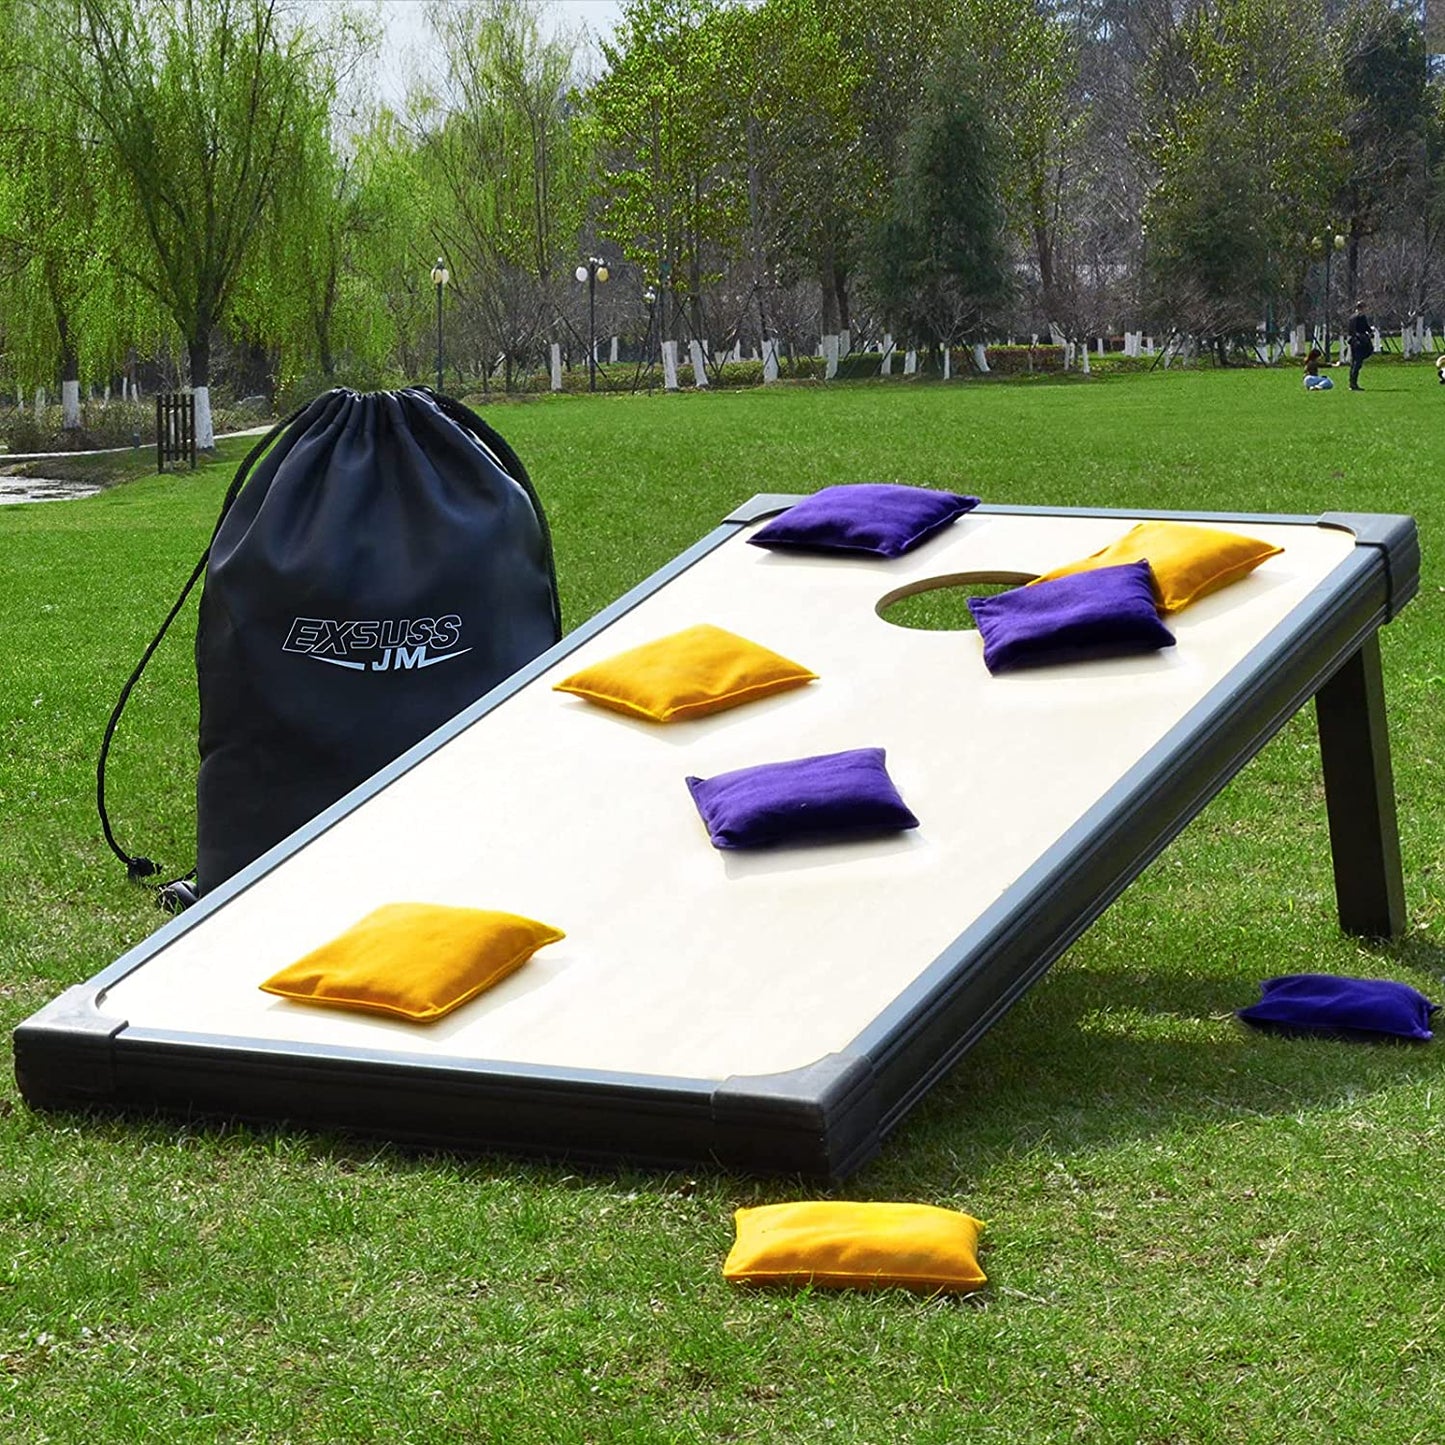 "Ultimate Weatherproof Cornhole Bags - 8 Pro-Grade Bean Bags for the Perfect Tossing Game, Includes Handy Tote Bag"